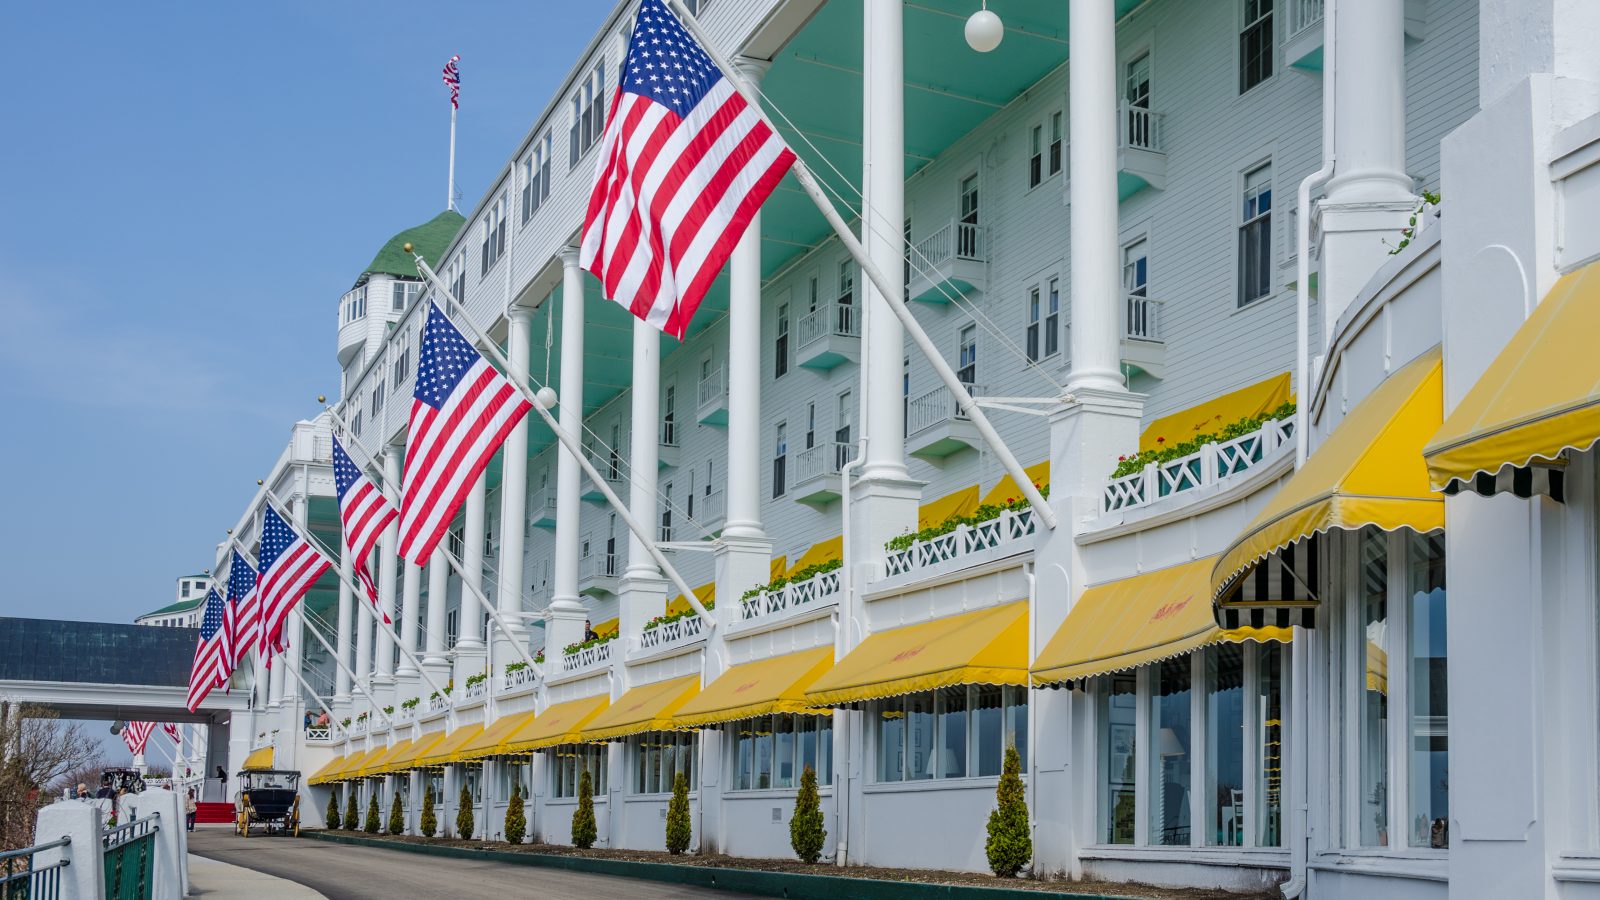 Hotel with white pillars, yellow awnings, and American flags